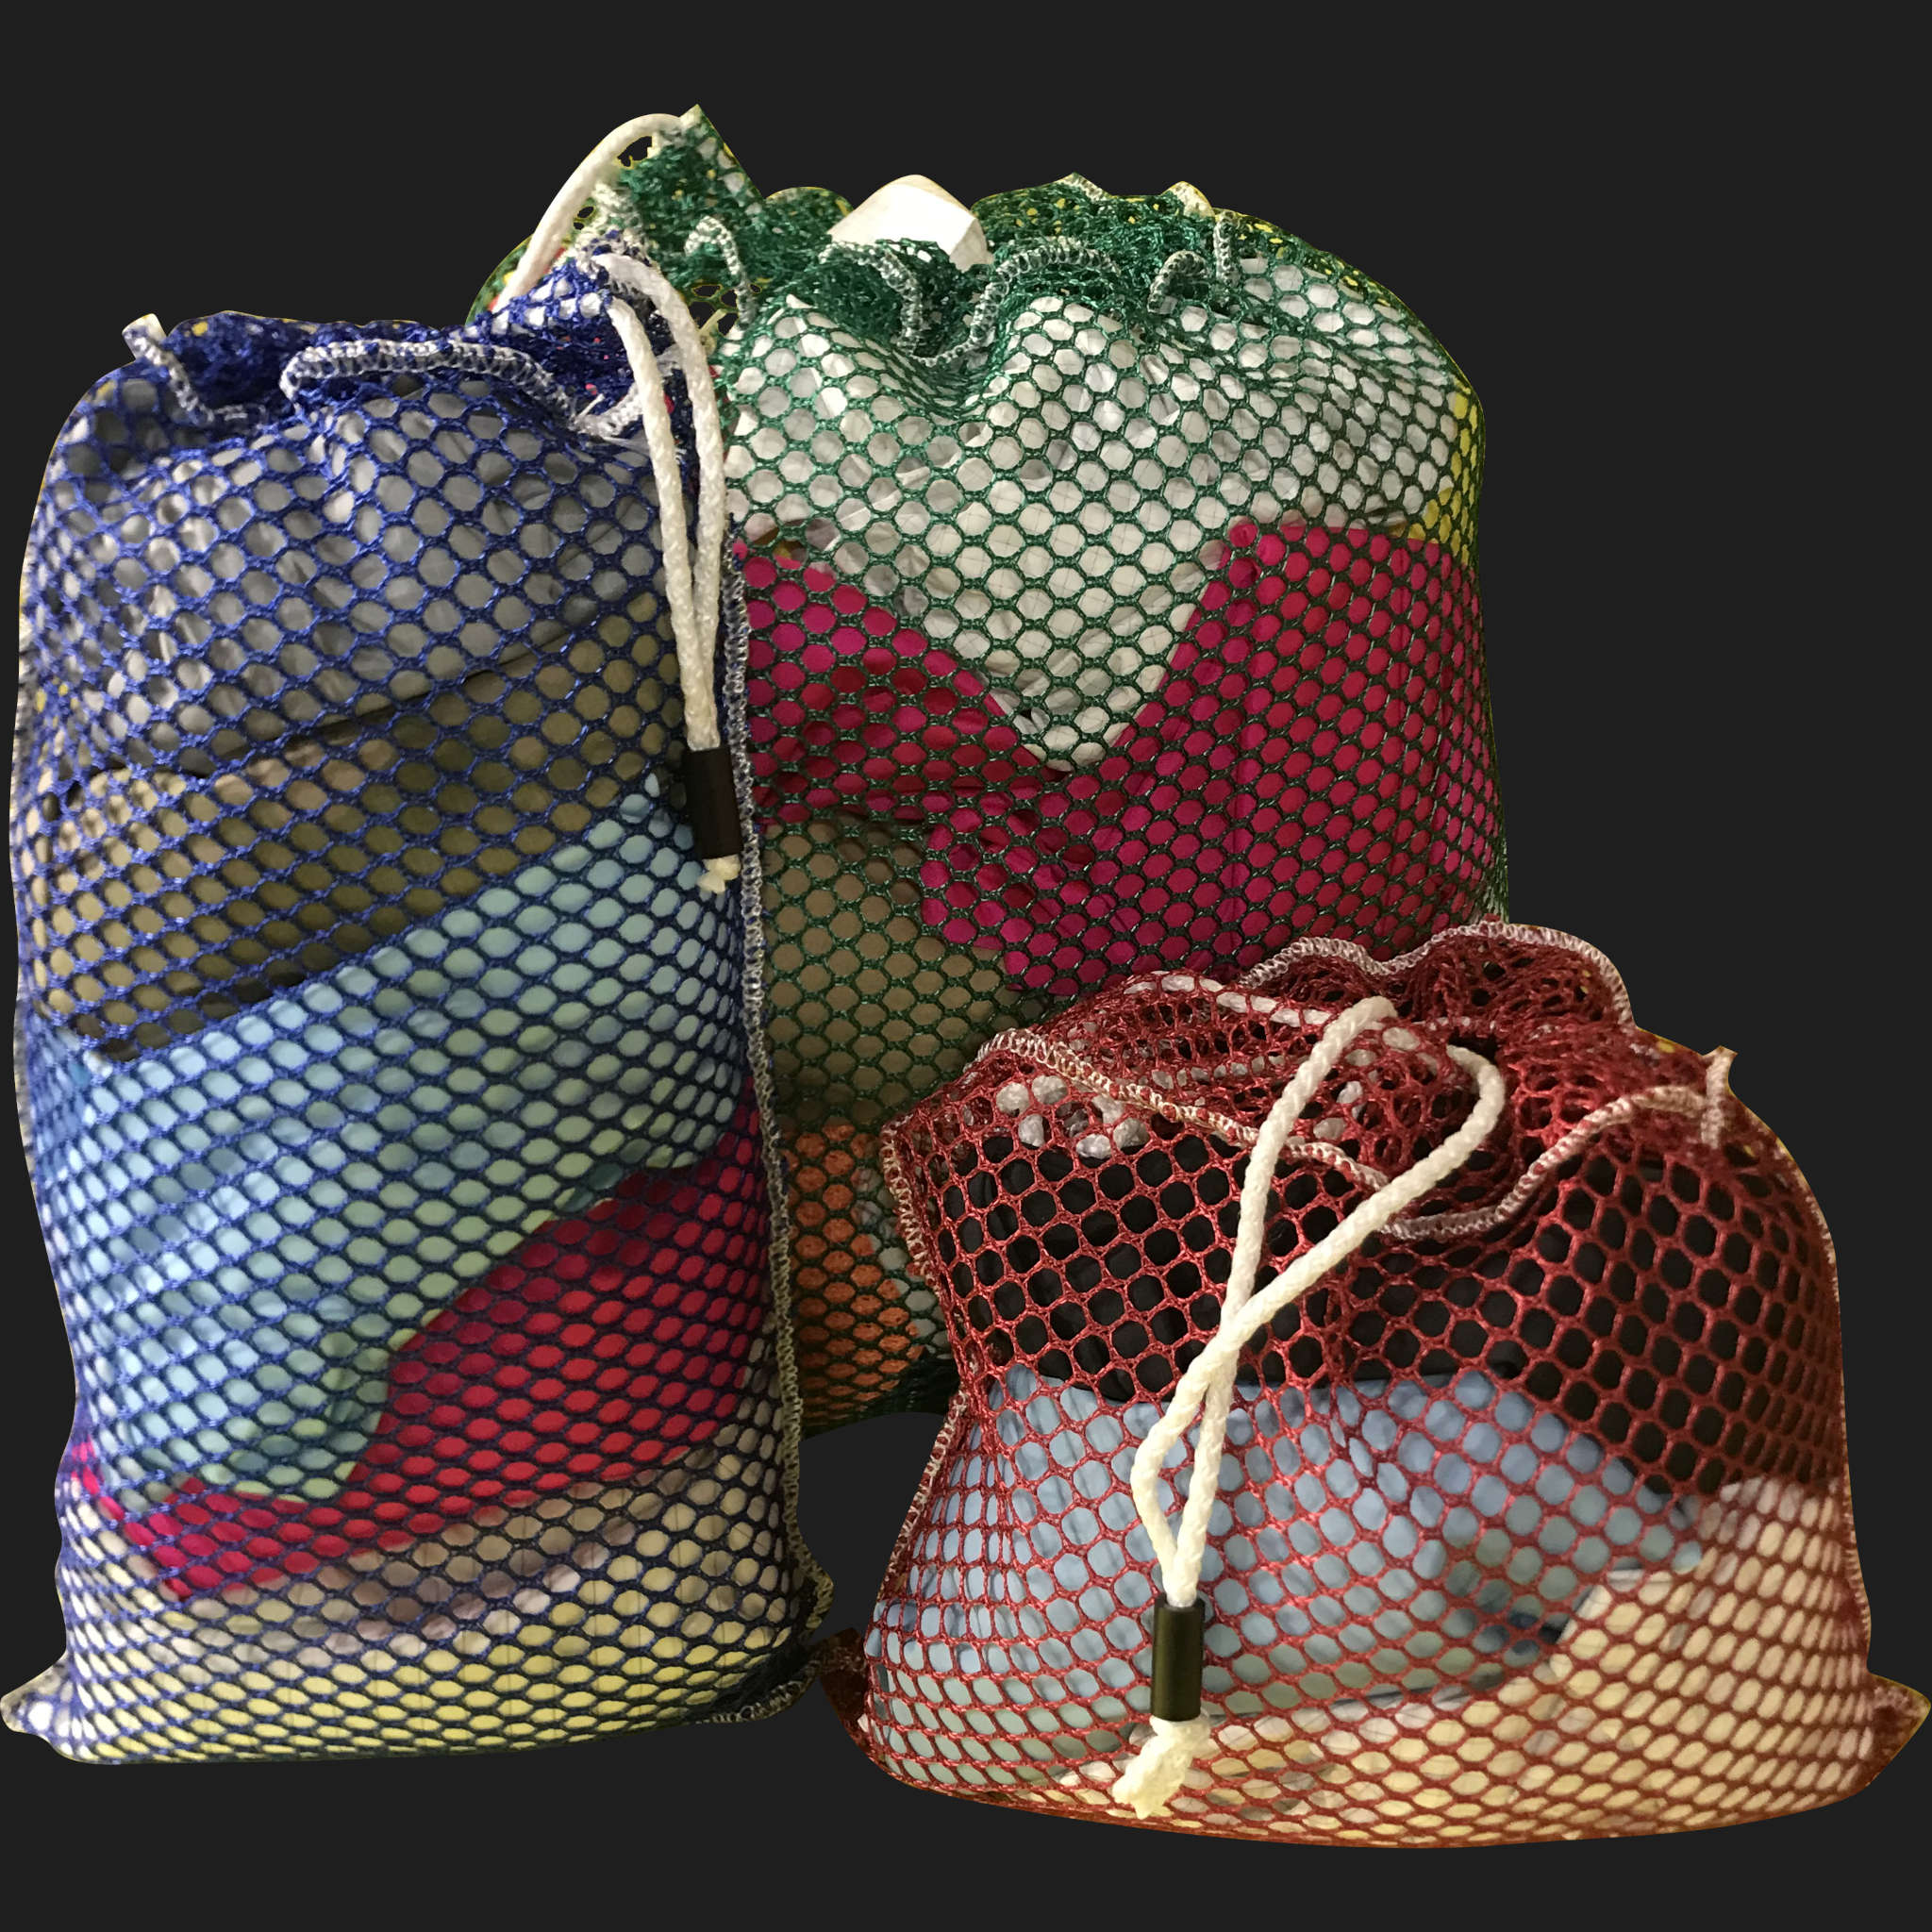 34" x 44" Customized Mesh-Net-Laundry Bags Heavy Duty with Cord and barrellock closure